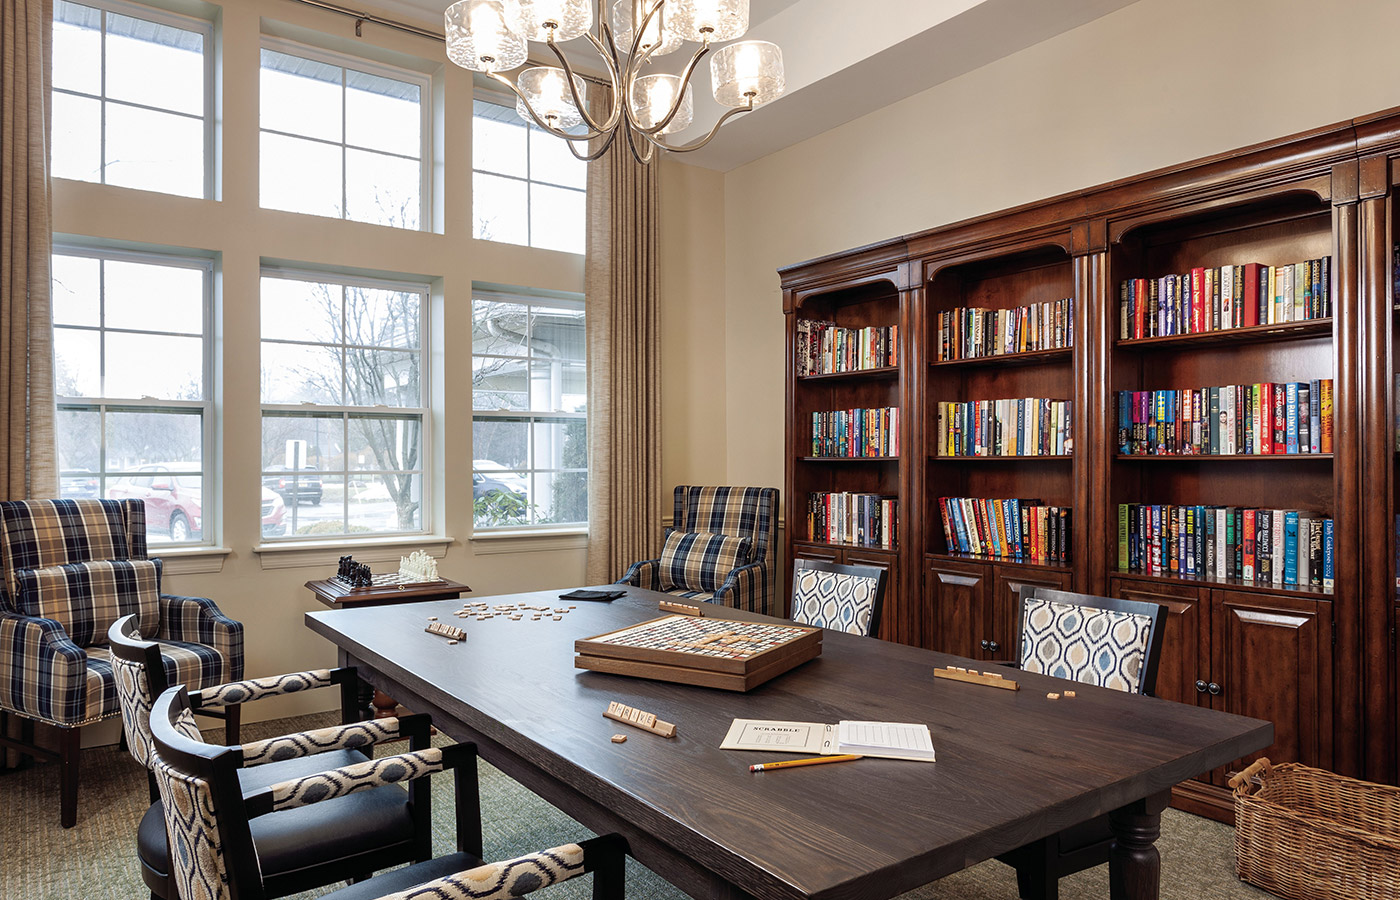 The library at The Legacy at Park Crescent.